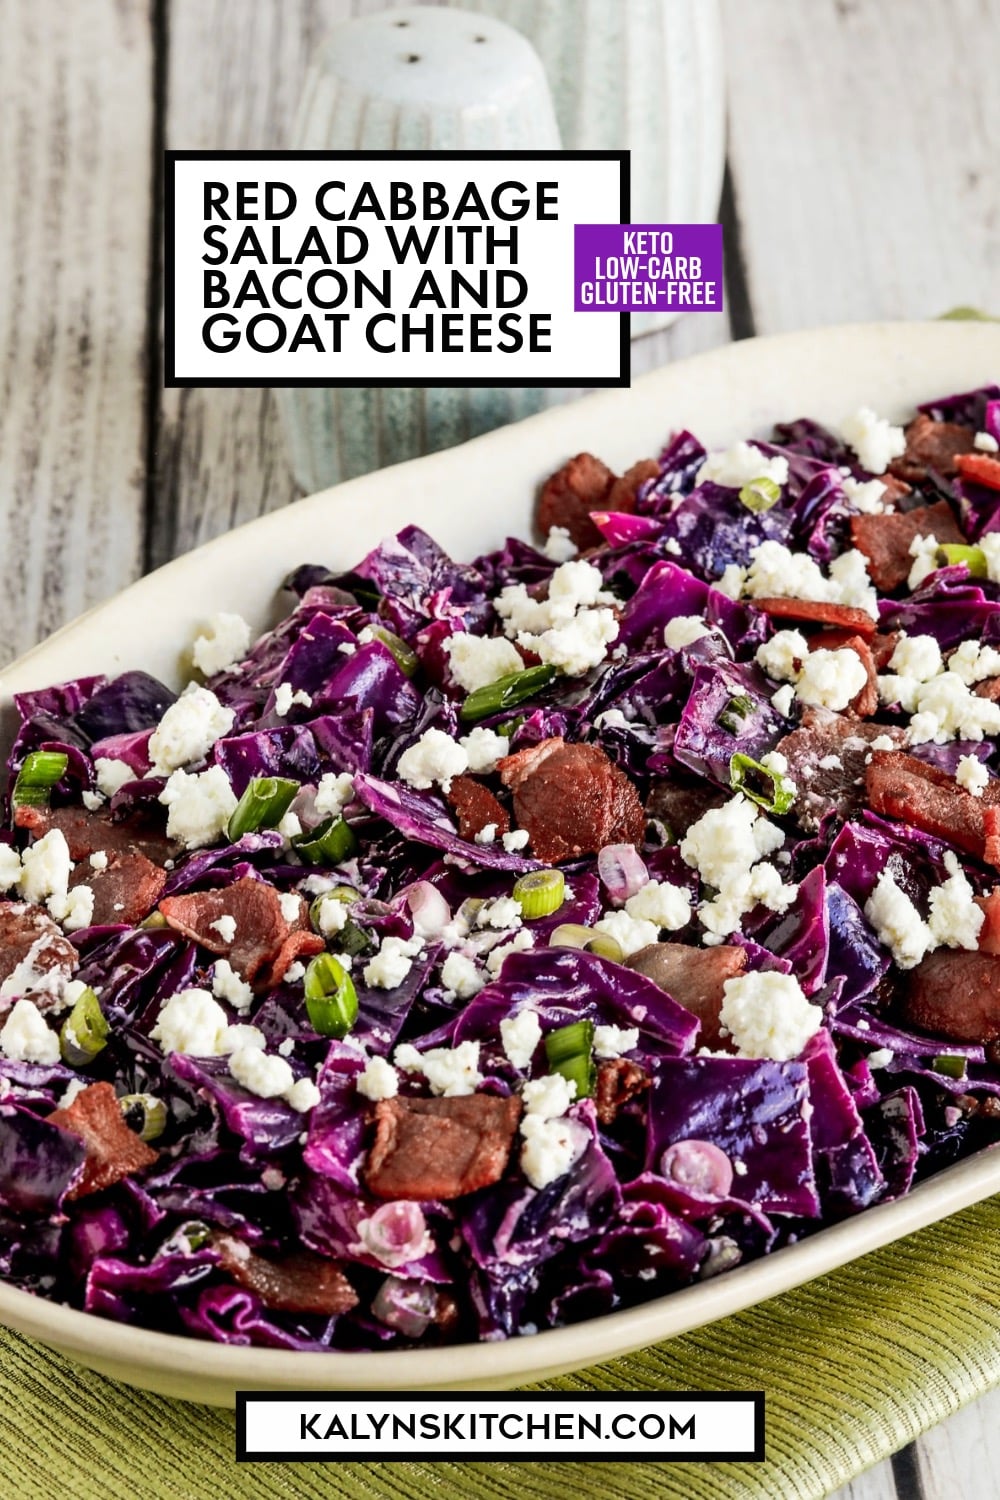 Pinterest image of Red Cabbage Salad with Bacon and Goat Cheese